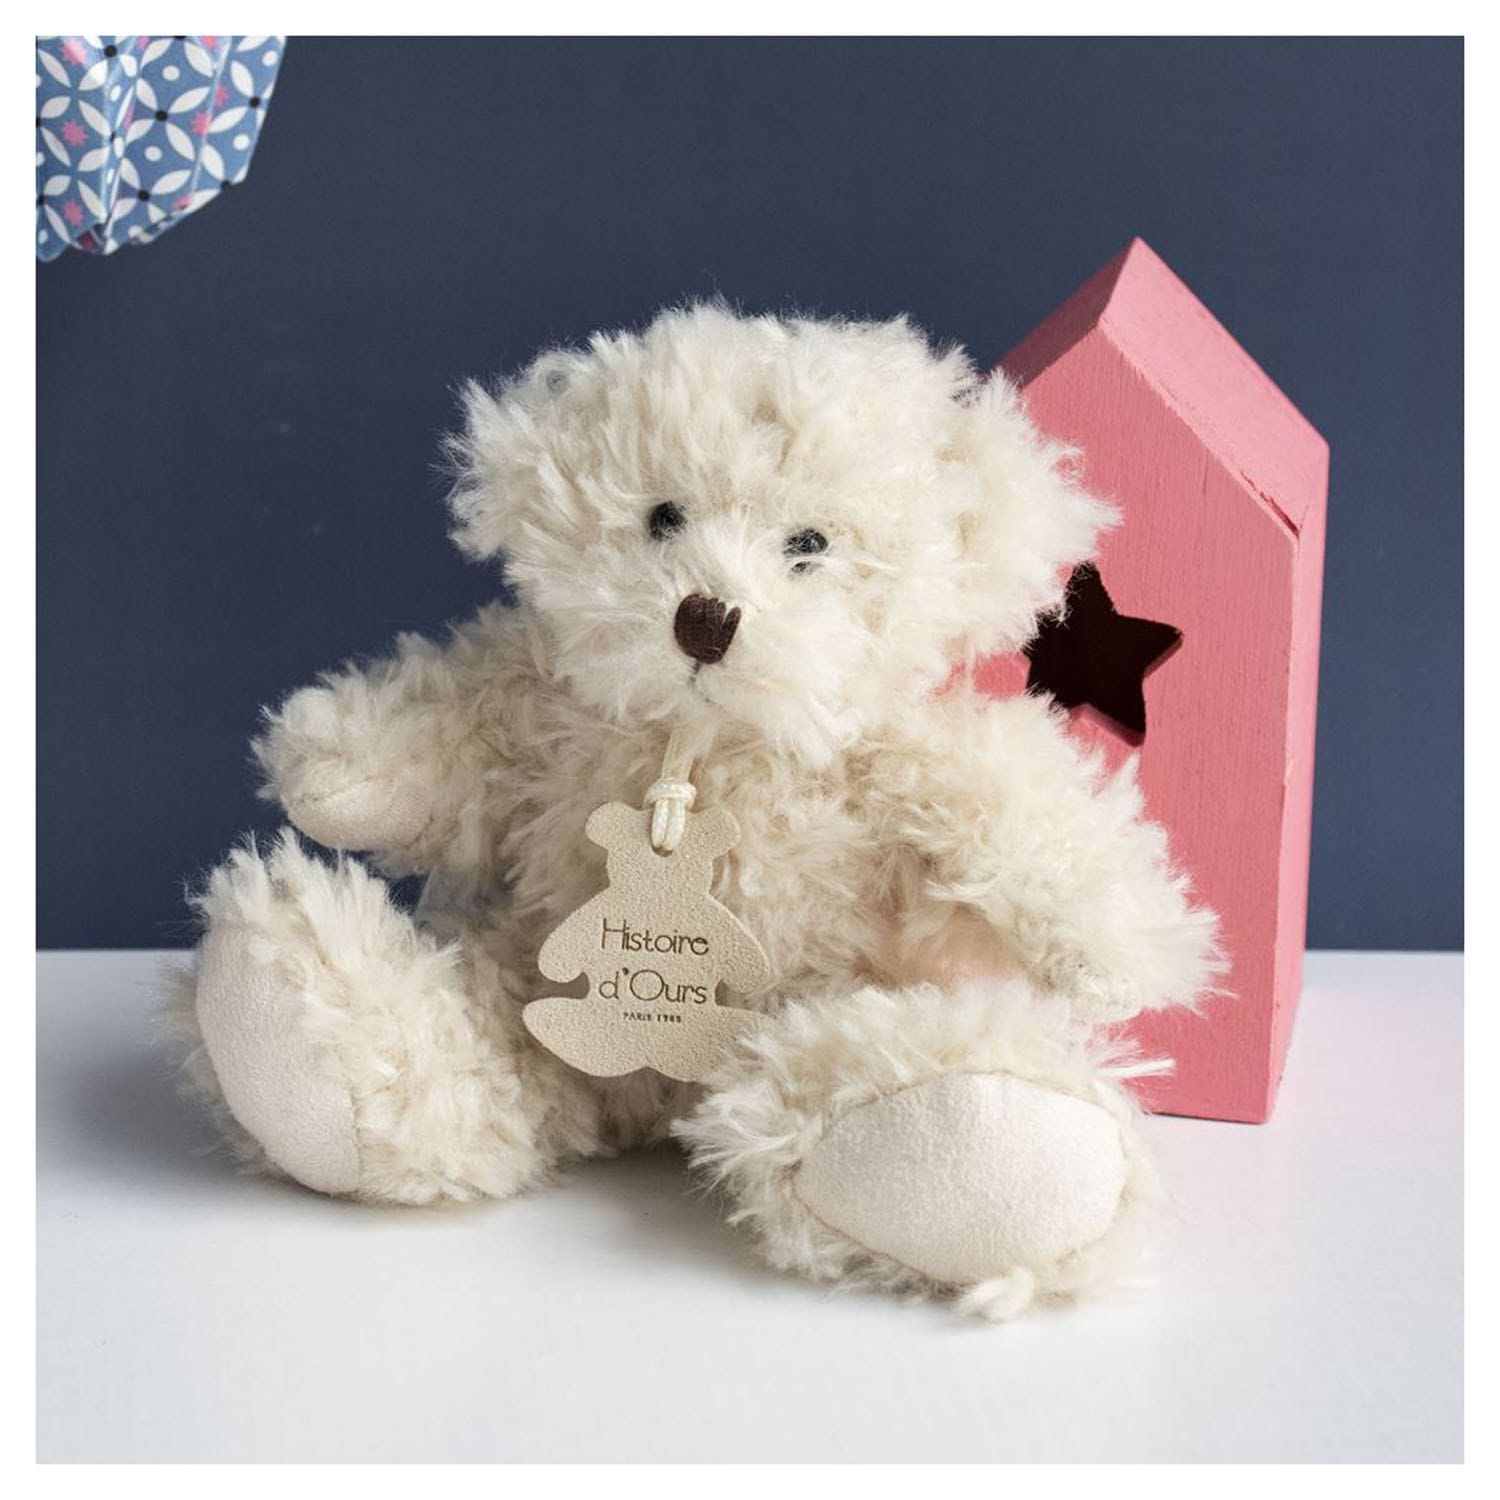 Peluche Ours Maurice Caramel